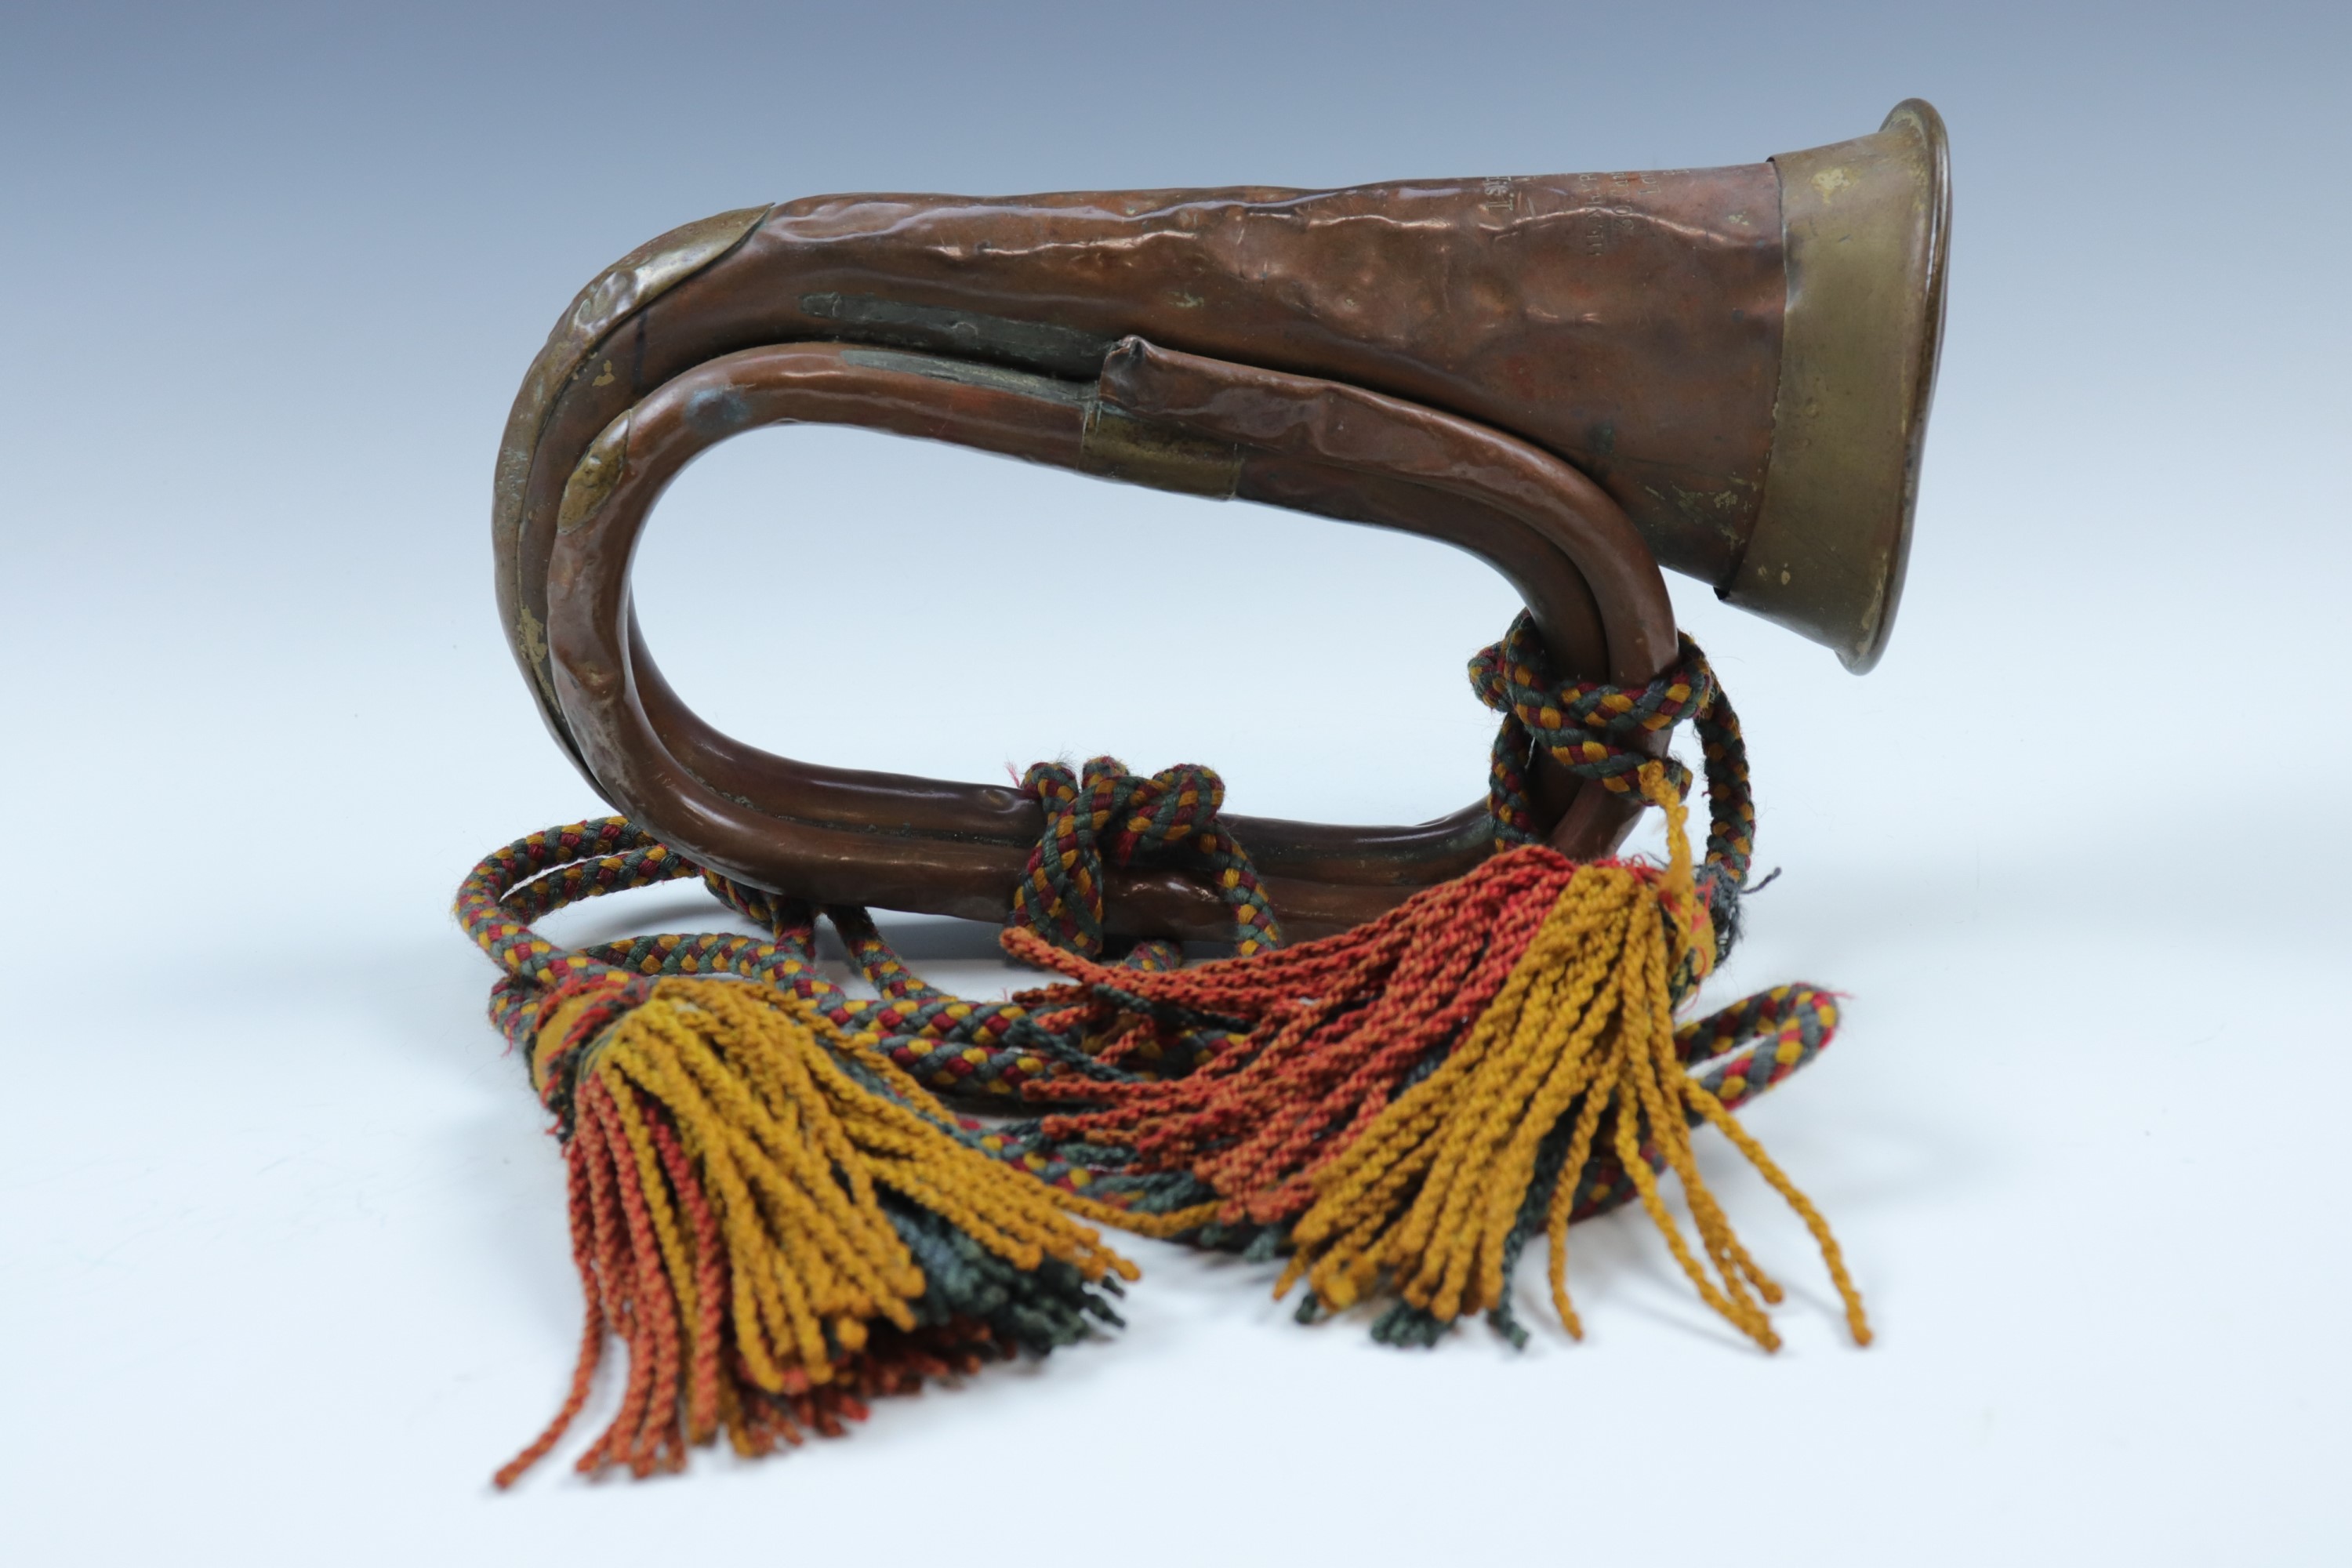 A Victorian British army bugle, dated 1890 and bearing 1st Battalion Scots Guards marks